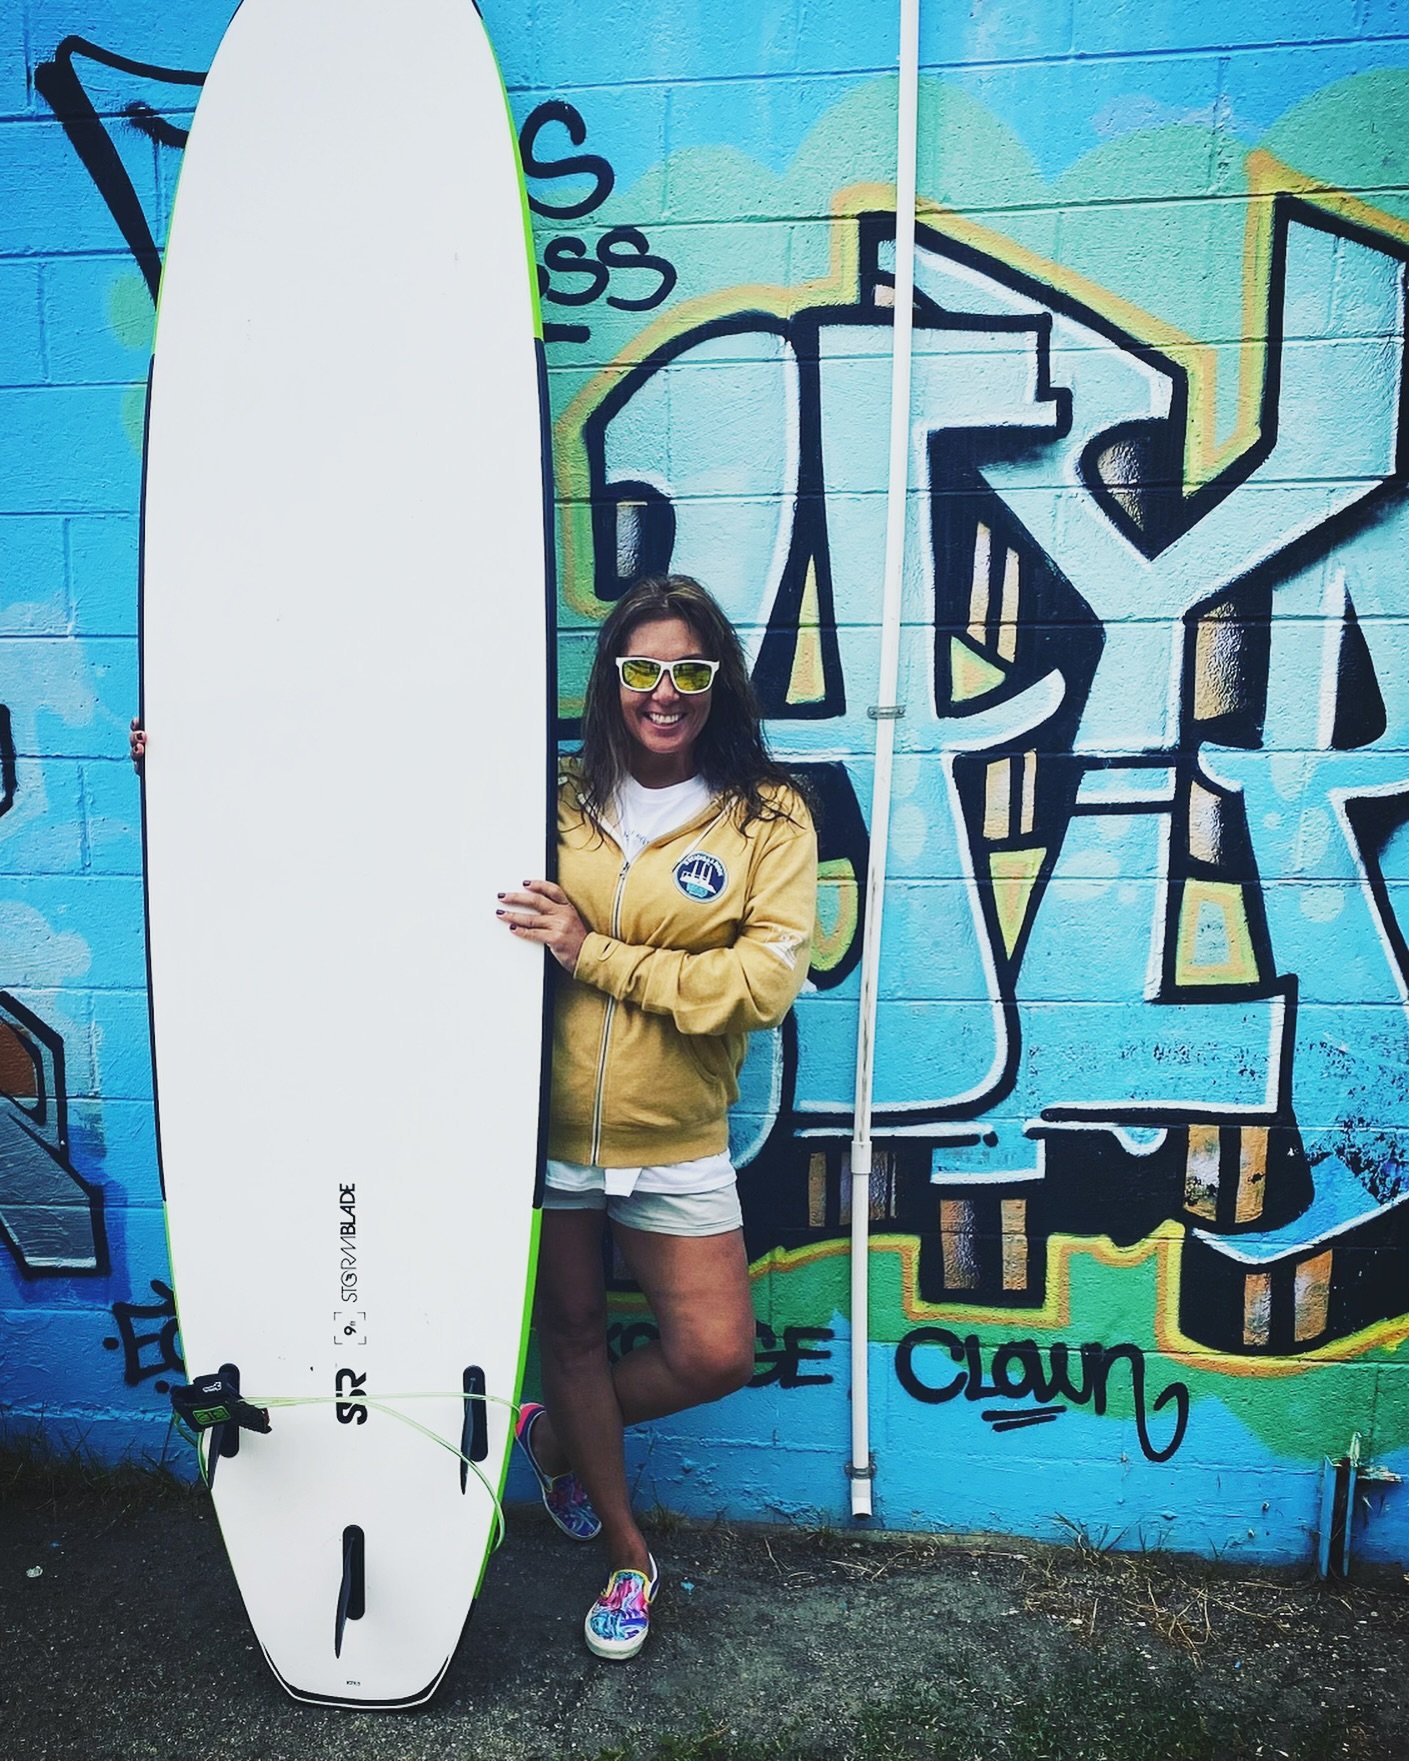 It&rsquo;s never too late to start something new! 🏄🏽&zwj;♀️ I was 50 when I rode my first wave on a surfboard. I had never even imagined surfing until I moved to the West Coast and met Joel. He was so stoked to get me out there. We drove to Santa C